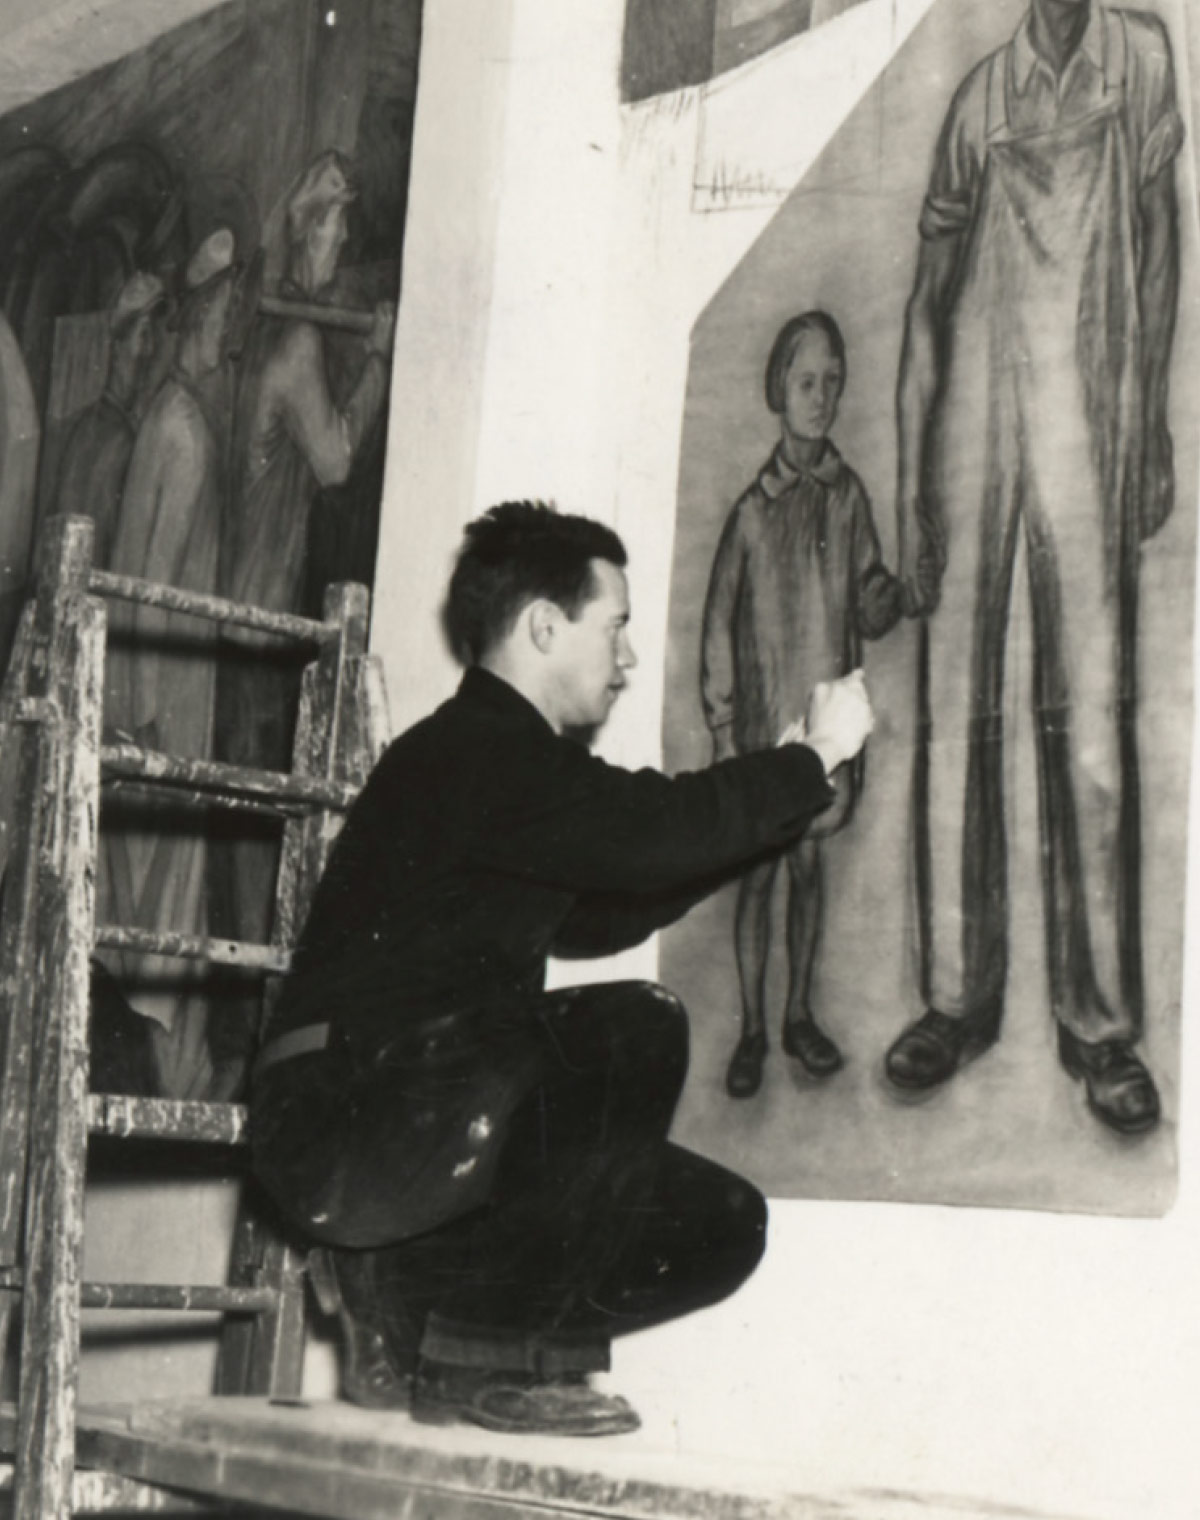 James Egelson standing on scaffolding and painting frescoes on the wall